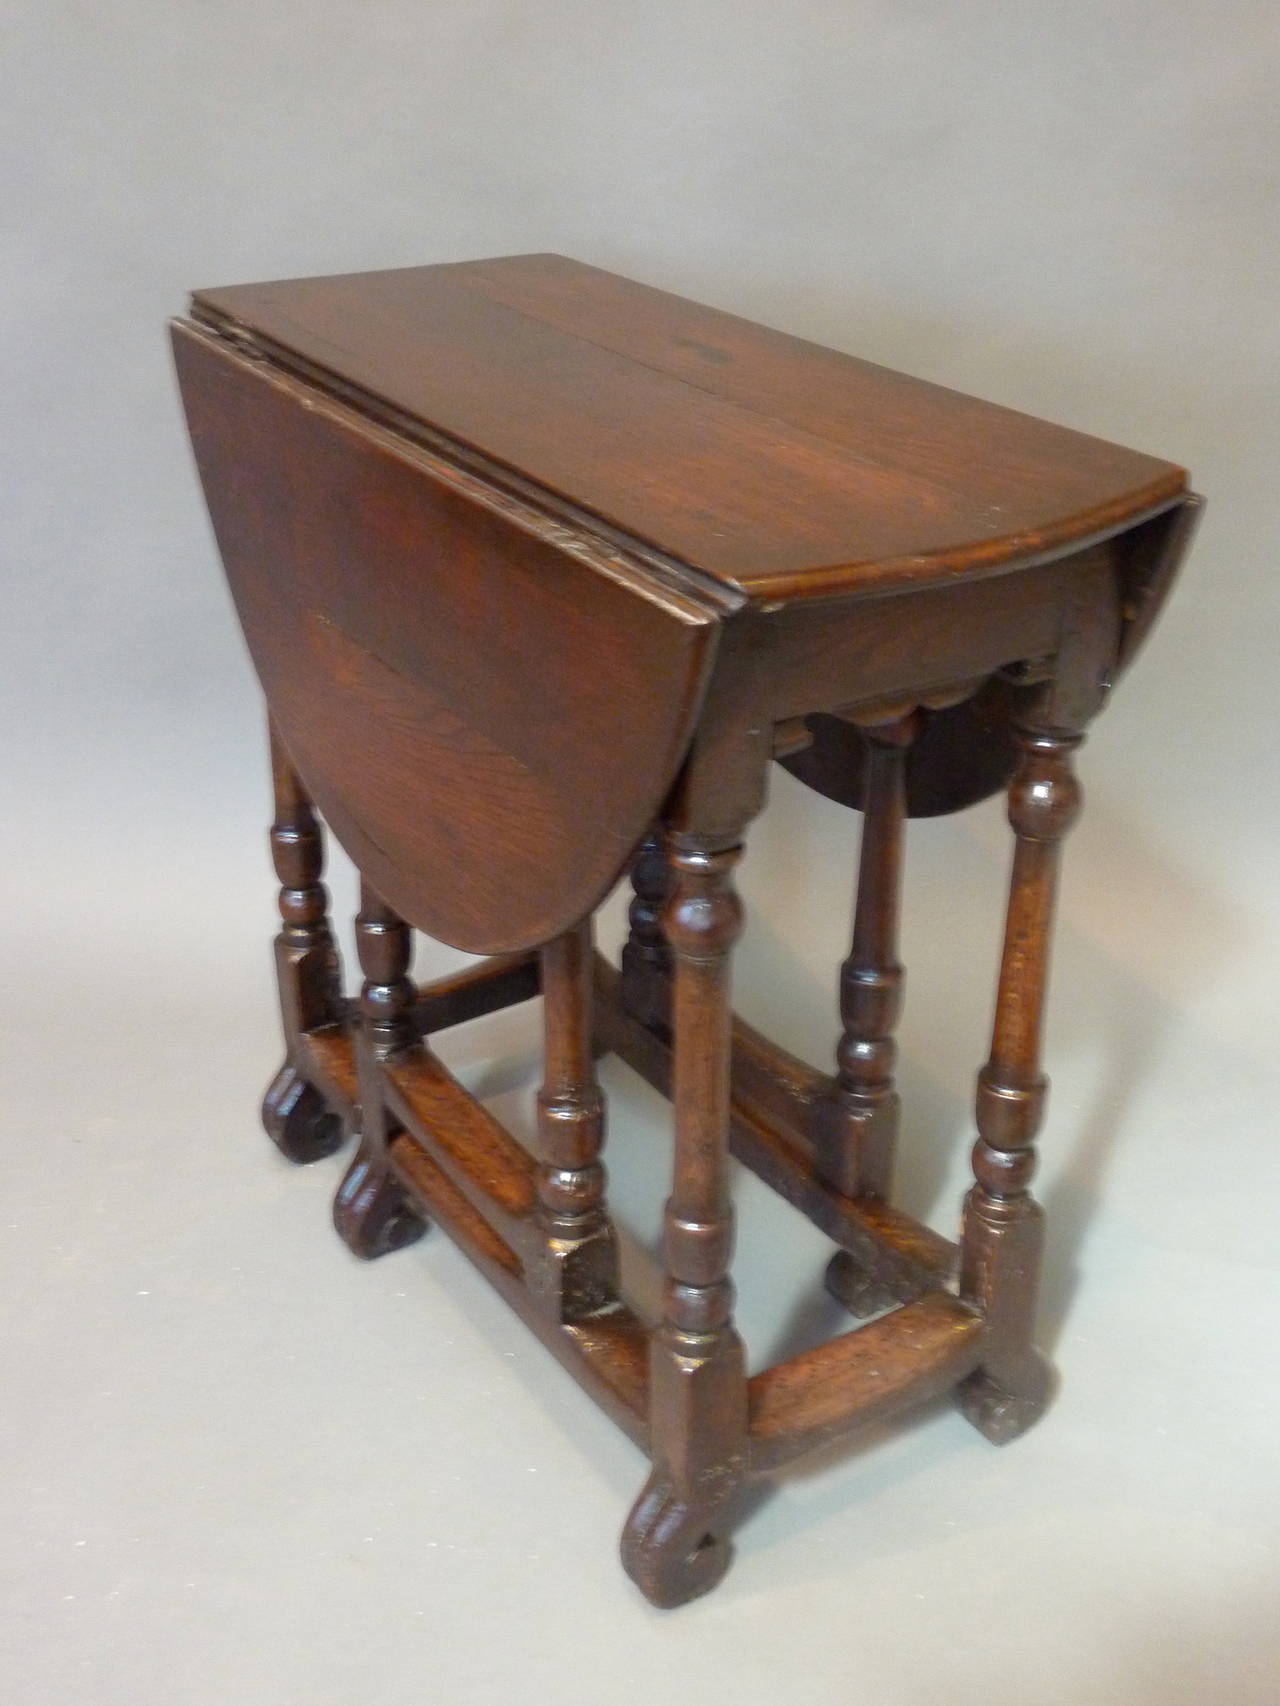 A Small Charles II Period 17th Century Gateleg Table. 1